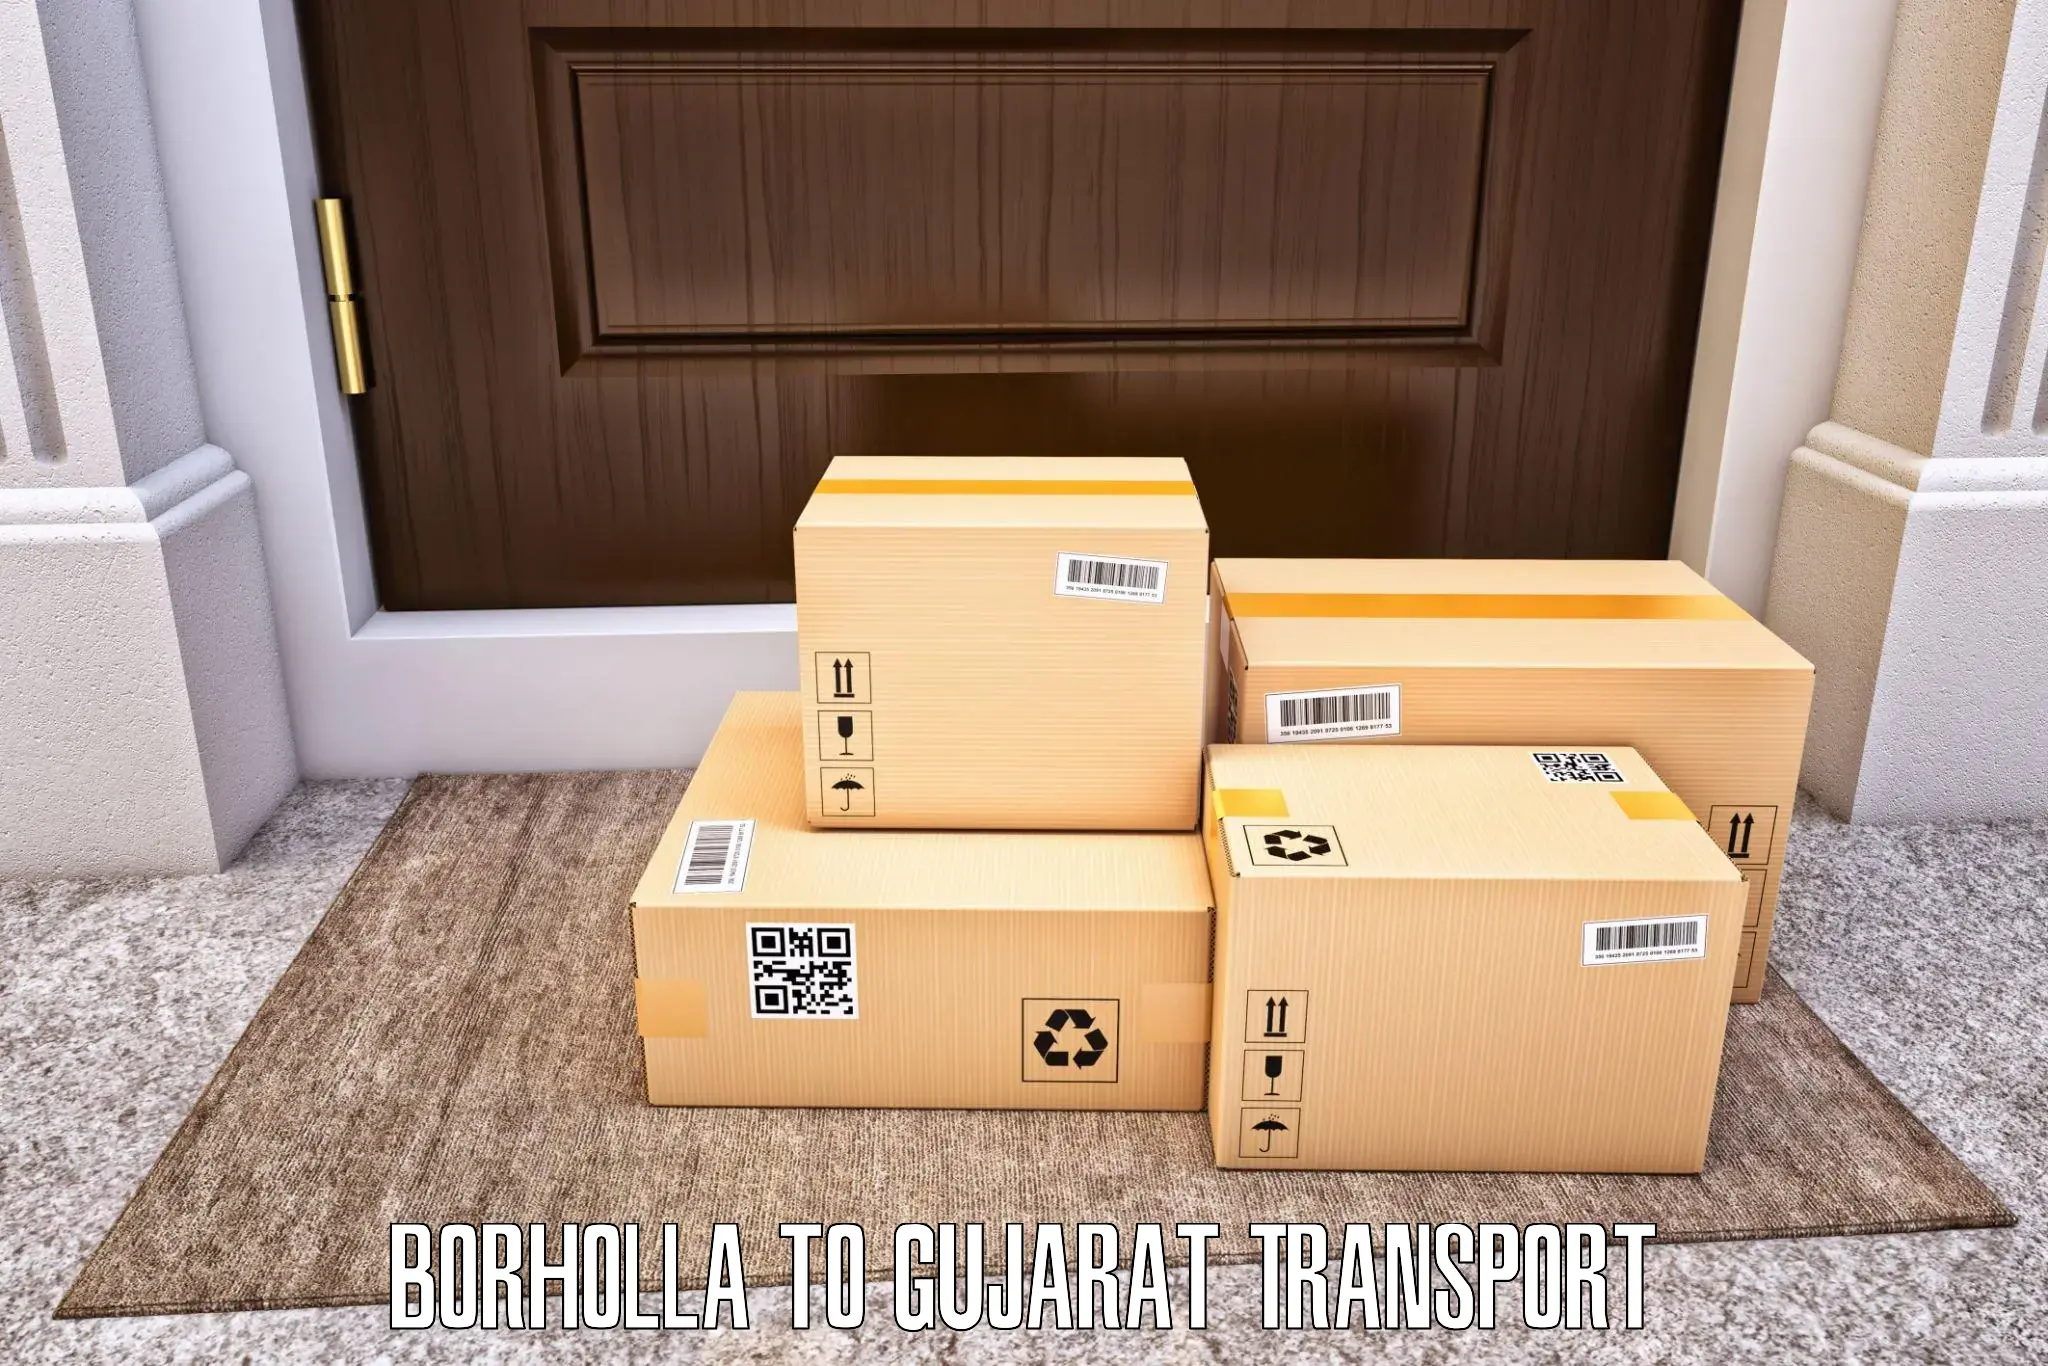 Container transport service in Borholla to Jamjodhpur